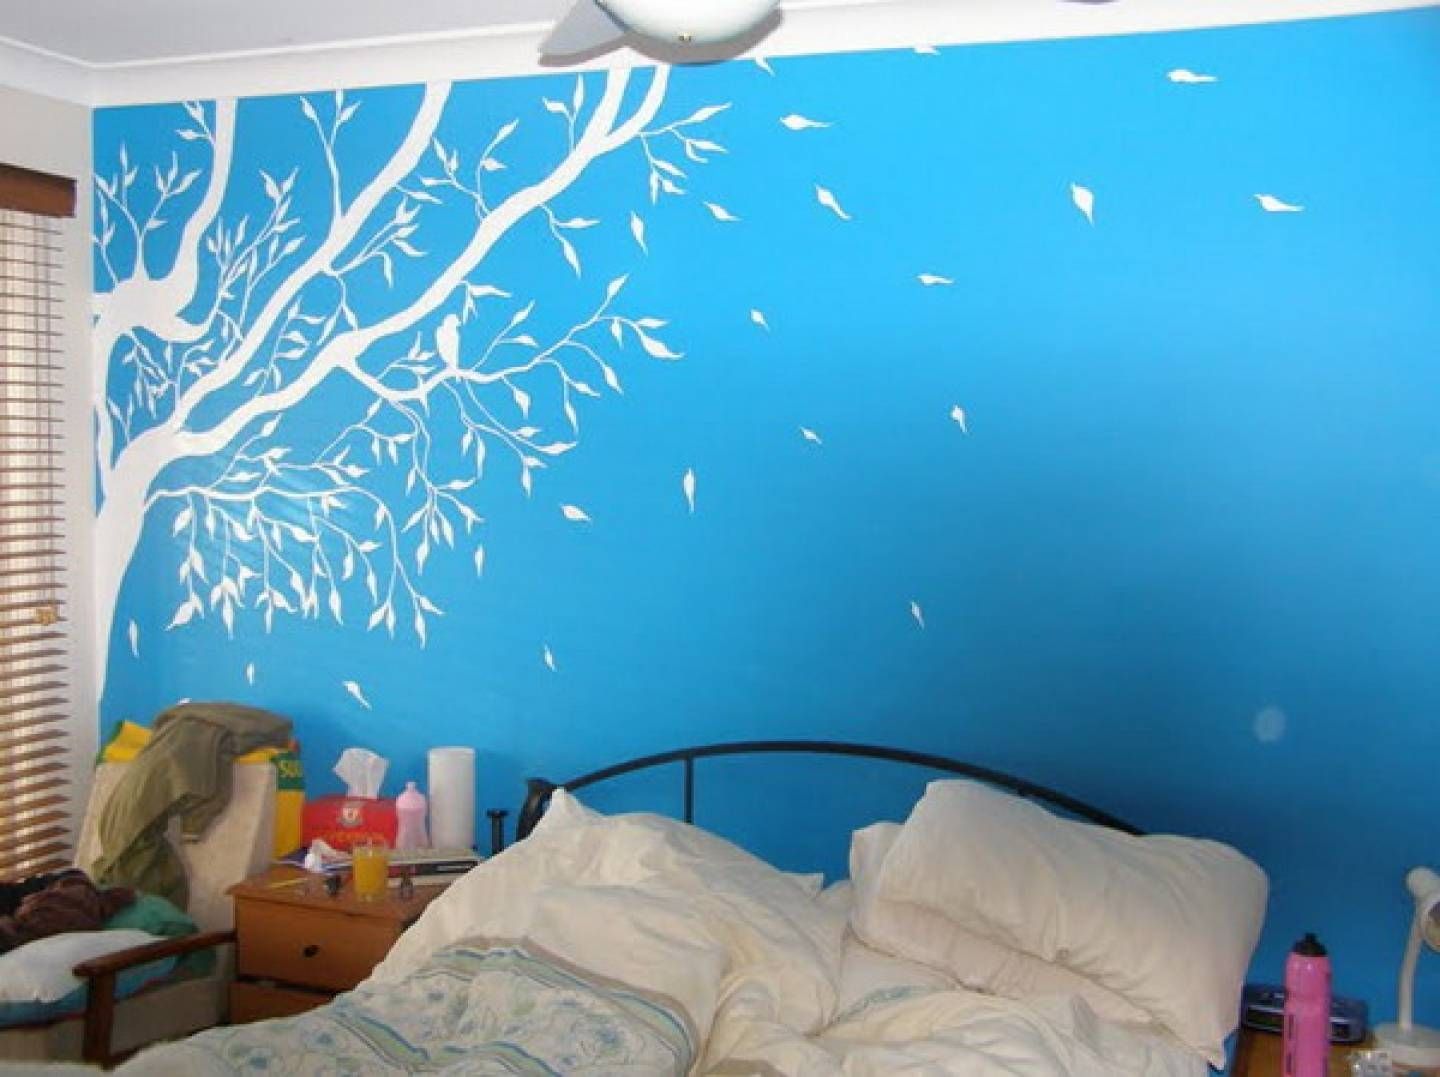 Wall Painting Ideas Blue Schemes Bedroom Blue Walls With White With 2017 Blue And White Wall Art (View 14 of 20)